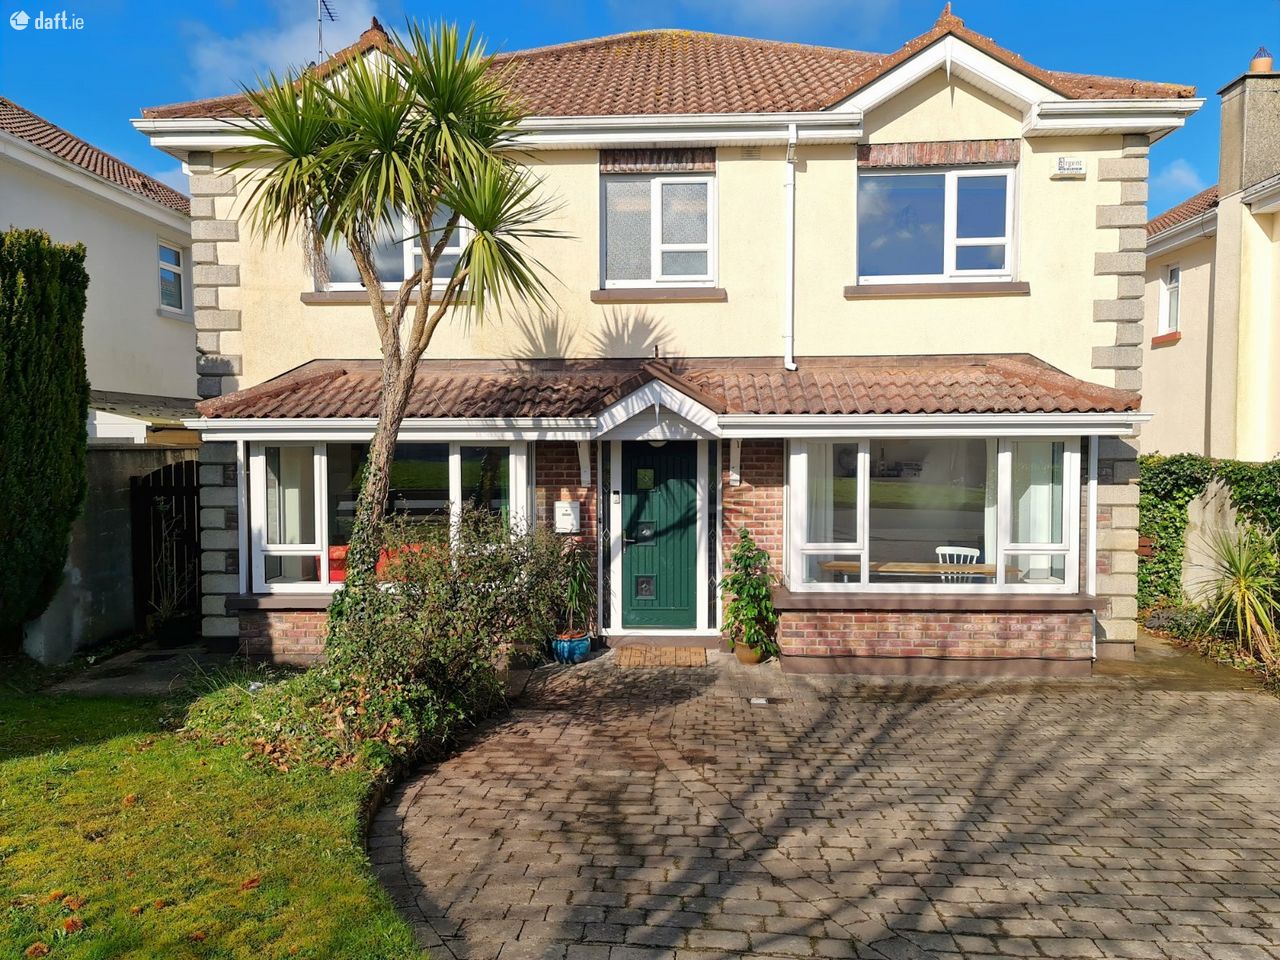 55 Pebble Bay, Friars Hill, Wicklow Town, Co. Wicklow